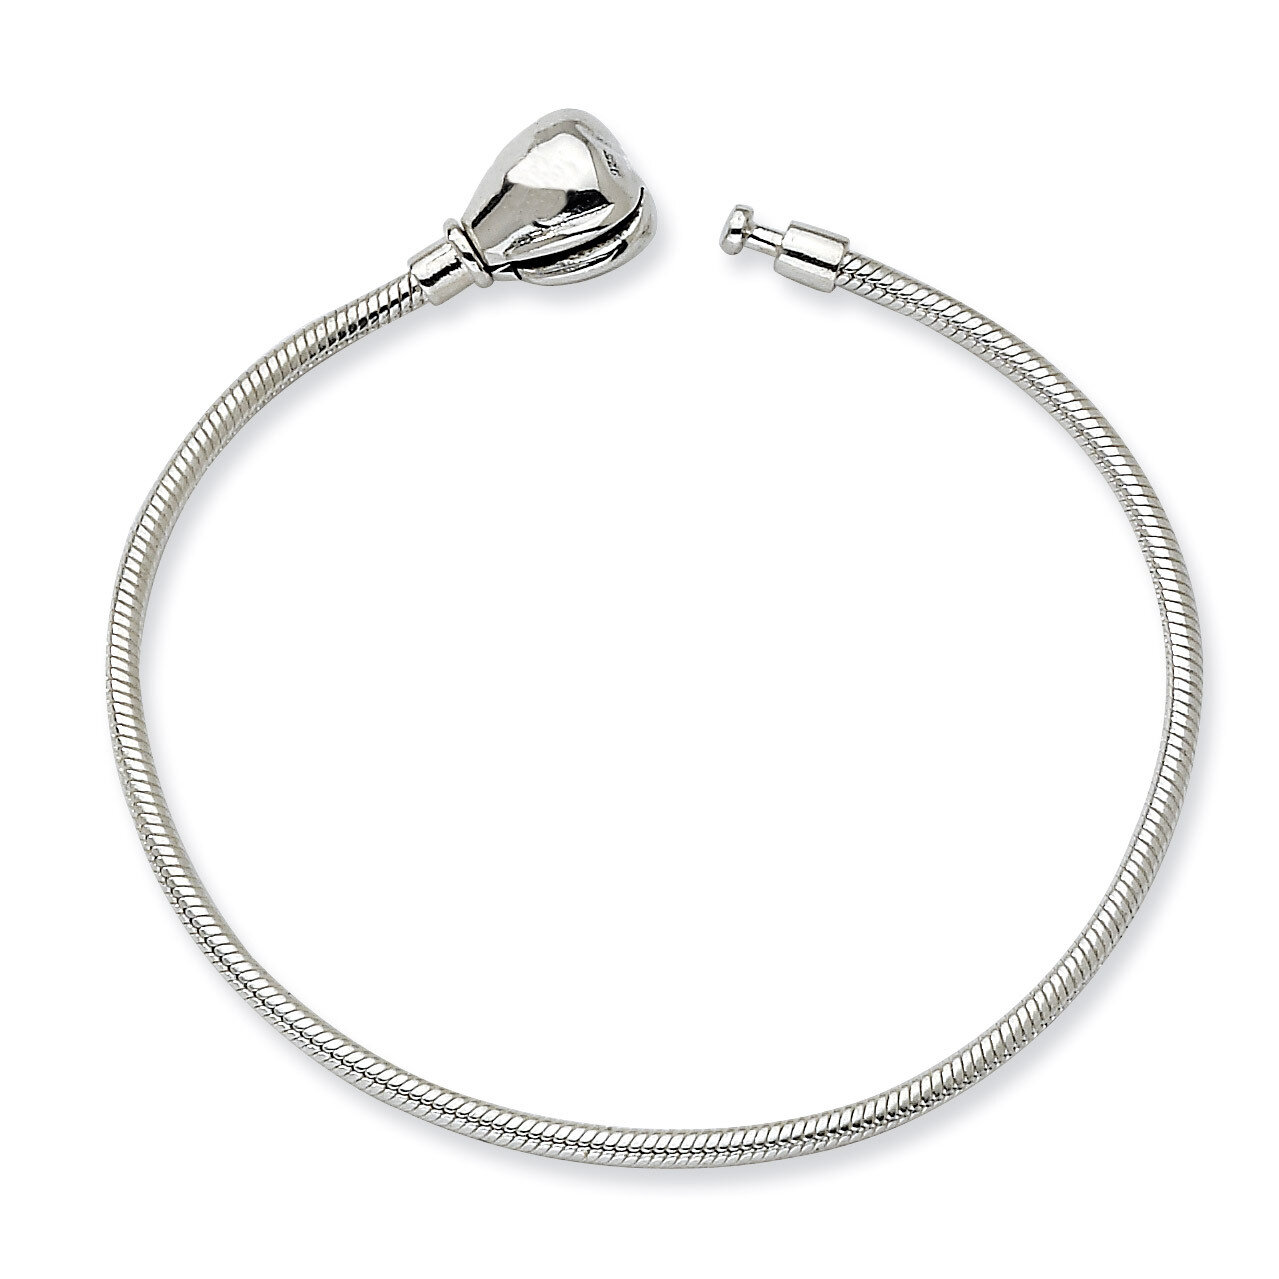 4.75 Inch 12cm Hinged Clasp Bead Bracelet - Sterling Silver QRS988-4.75